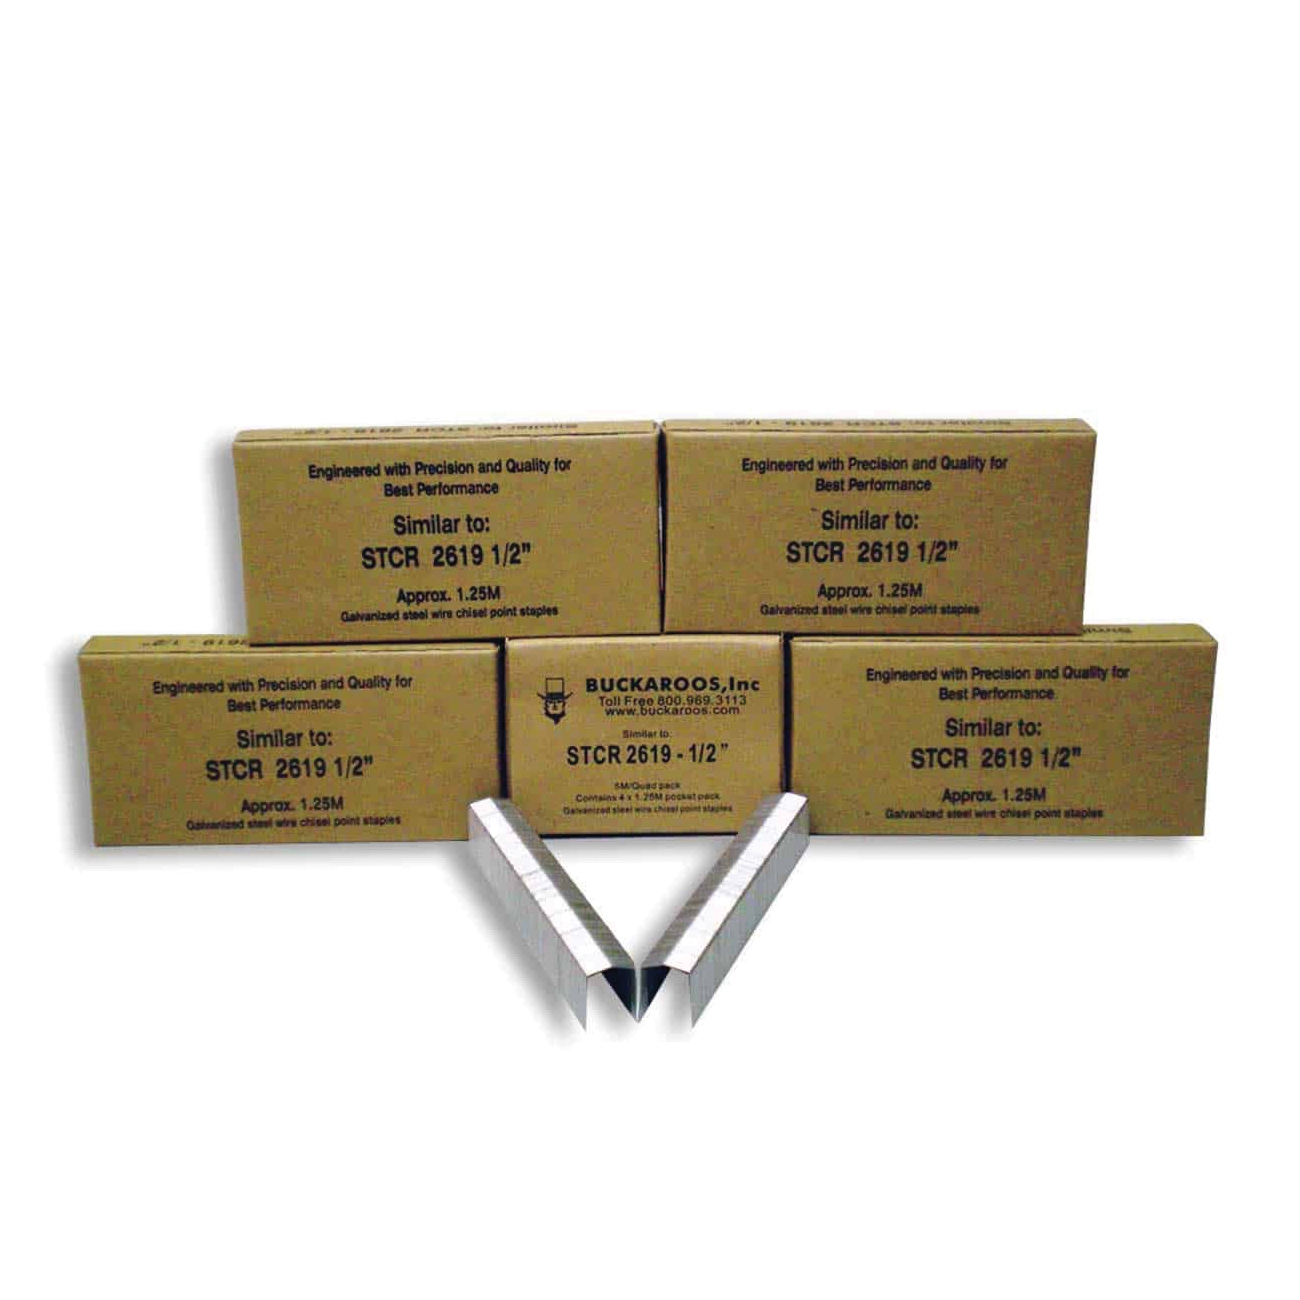 Buckaroos® T-68V4 Staple, For Use With: T-68AA Red G-26 Tacker, T-68-BL26 Black G-26 Tacker